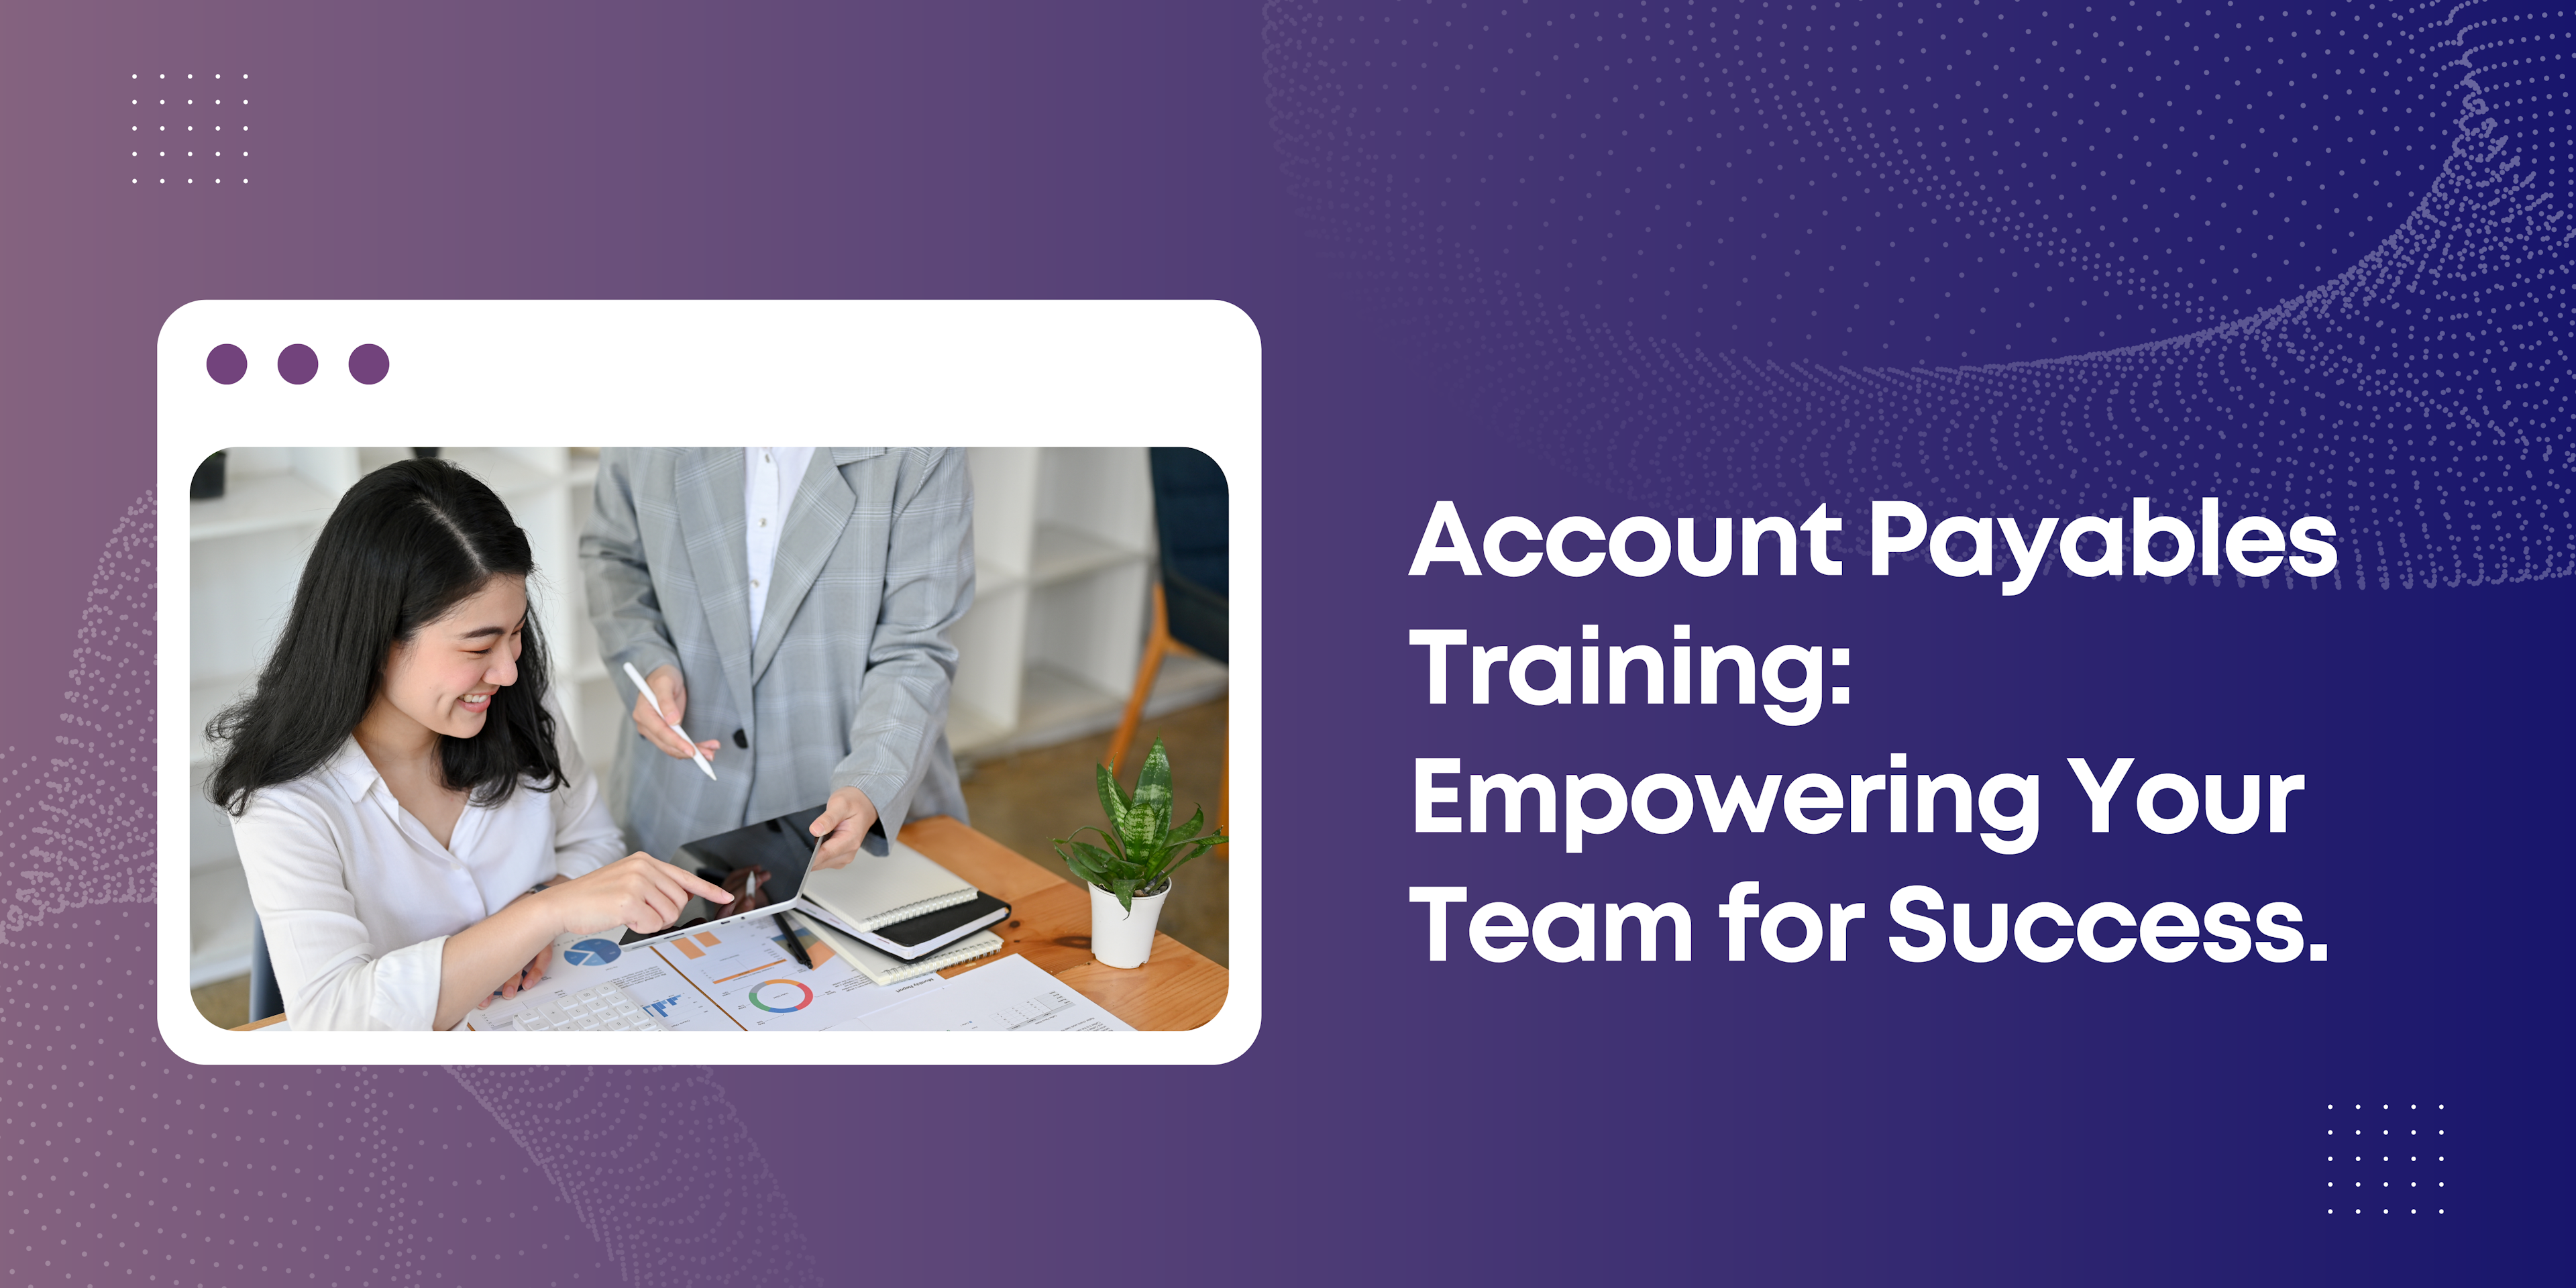 Invest in your team's accounts payable knowledge for better accuracy, efficiency, and fraud prevention